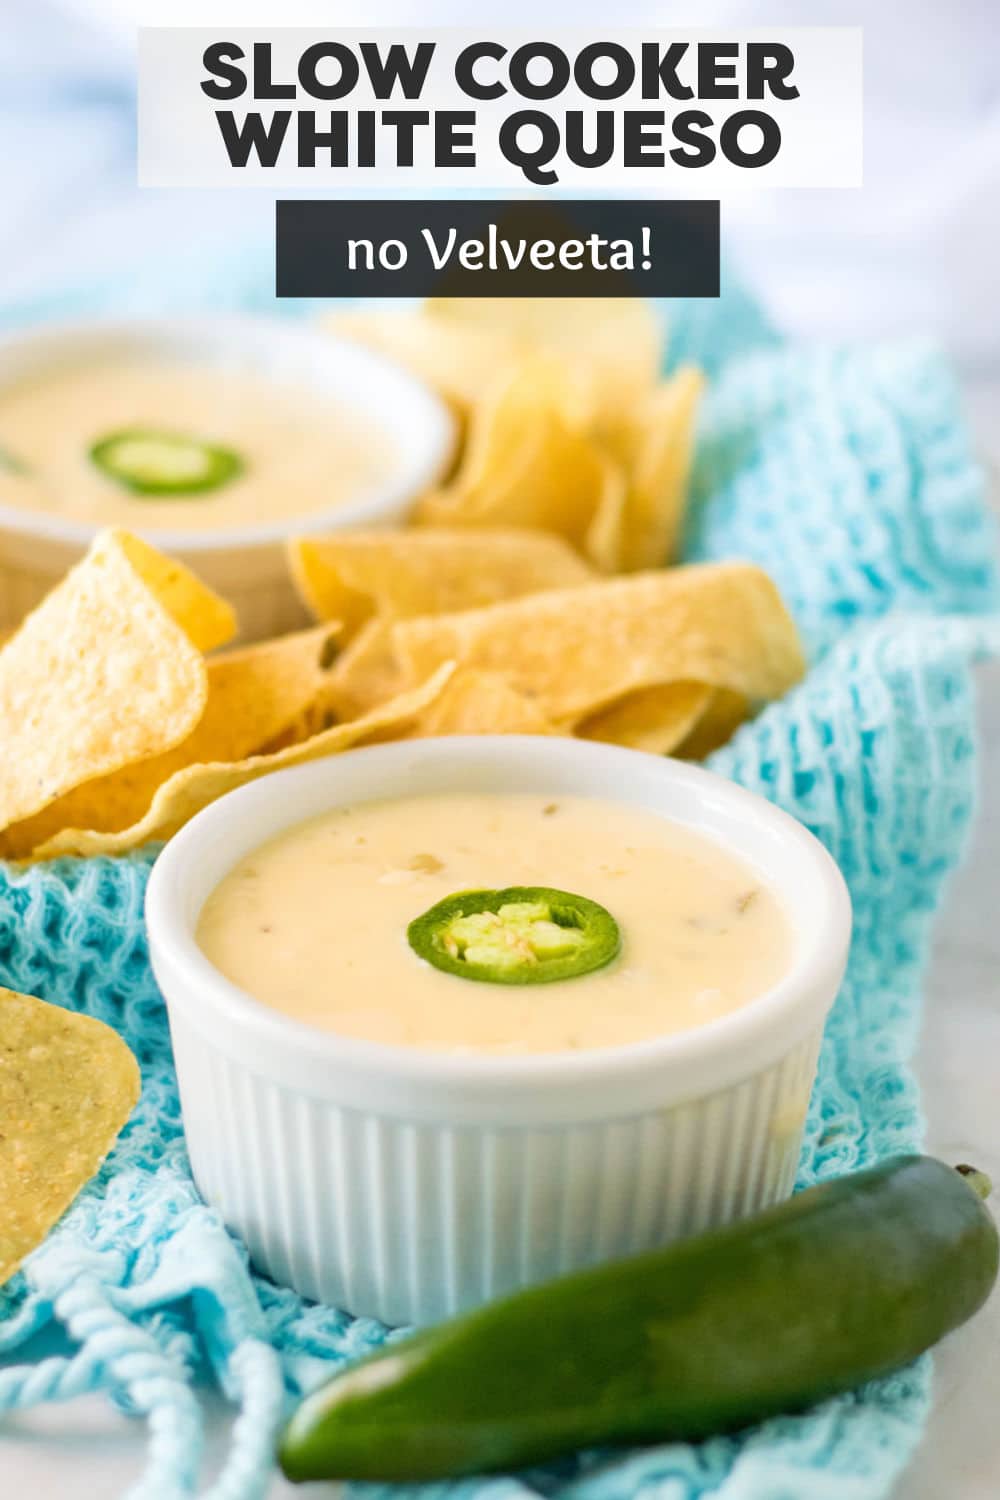 Slow Cooker Queso Blanco (aka white queso dip) is made with just four ingredients and no Velveeta! Restaurant quality made in just minutes in the crockpot. | www.persnicketyplates.com